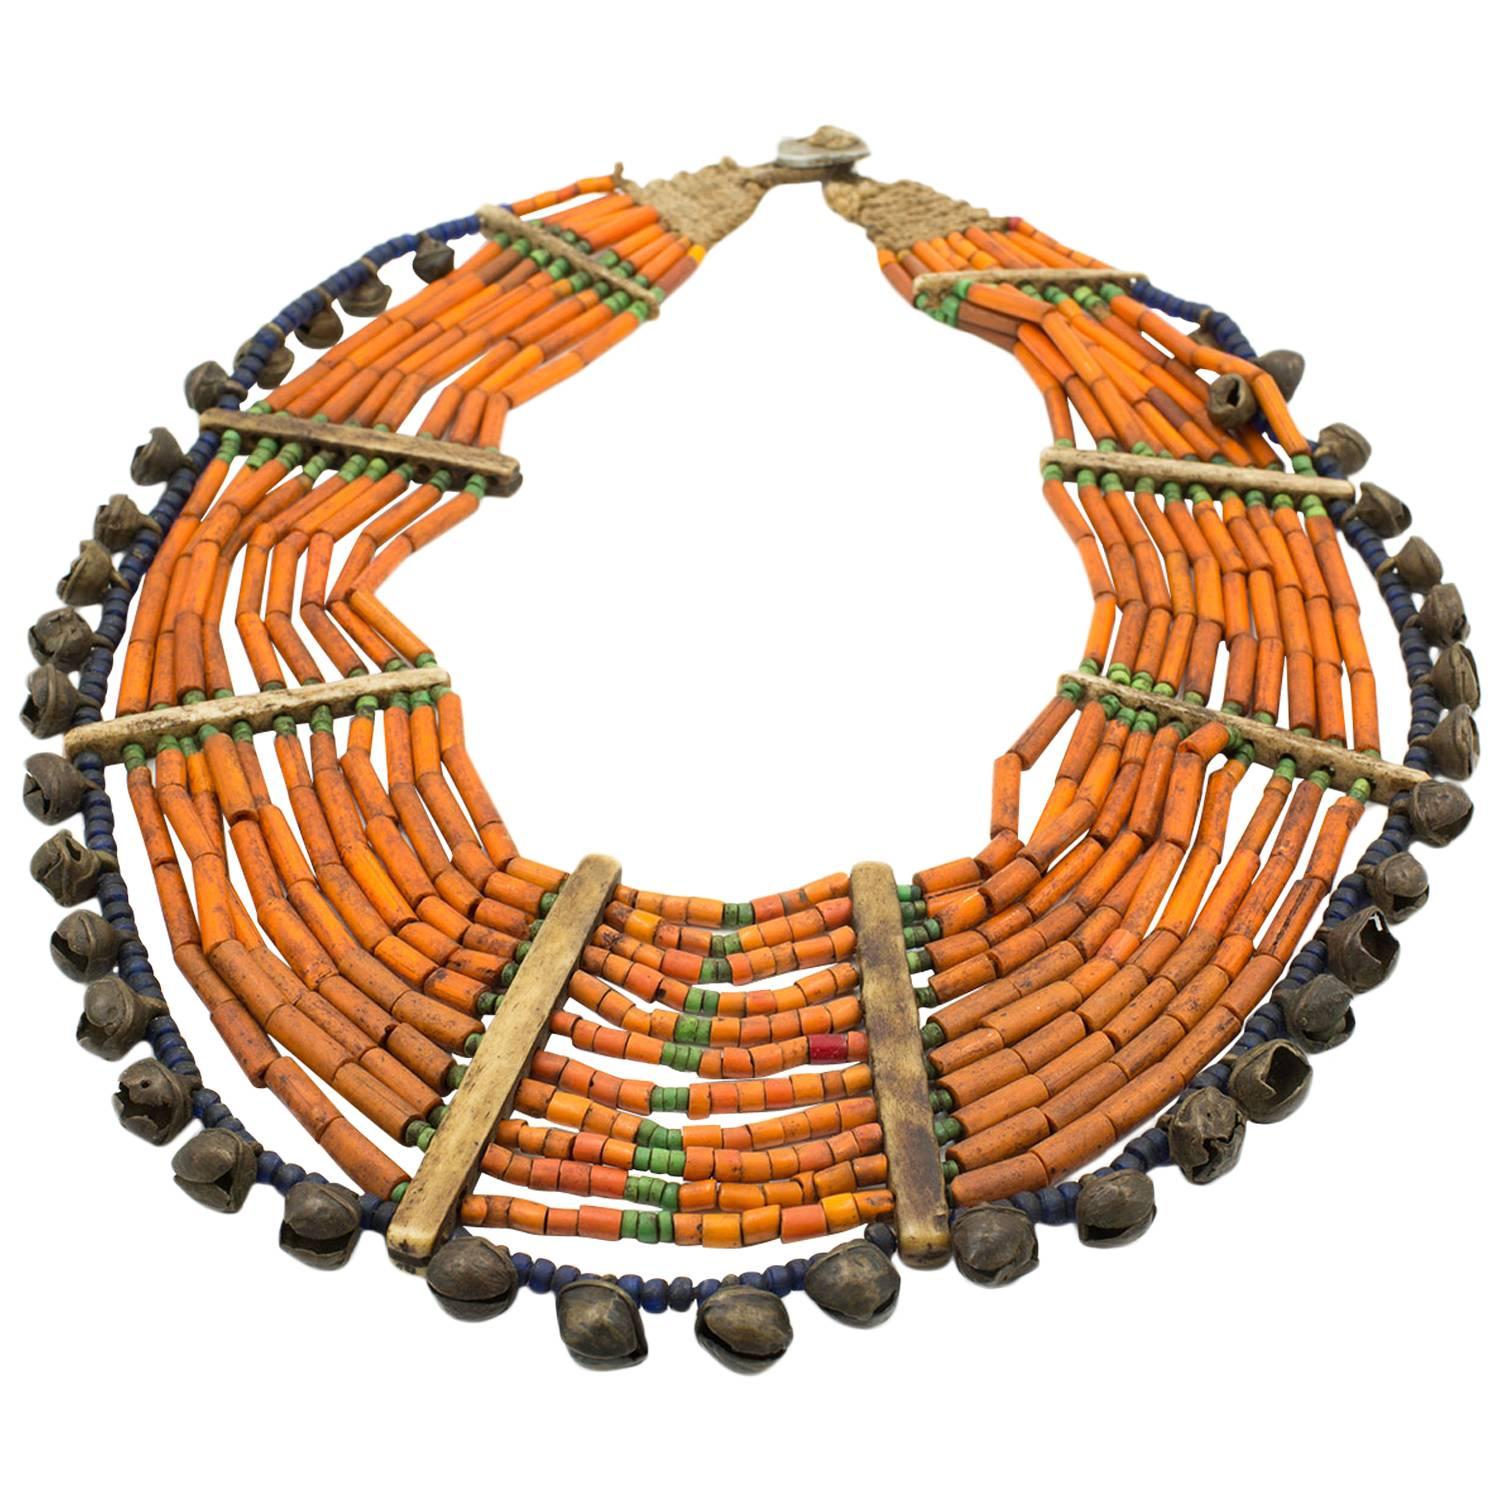 Antique Primitive Tribal Necklace from Nagaland